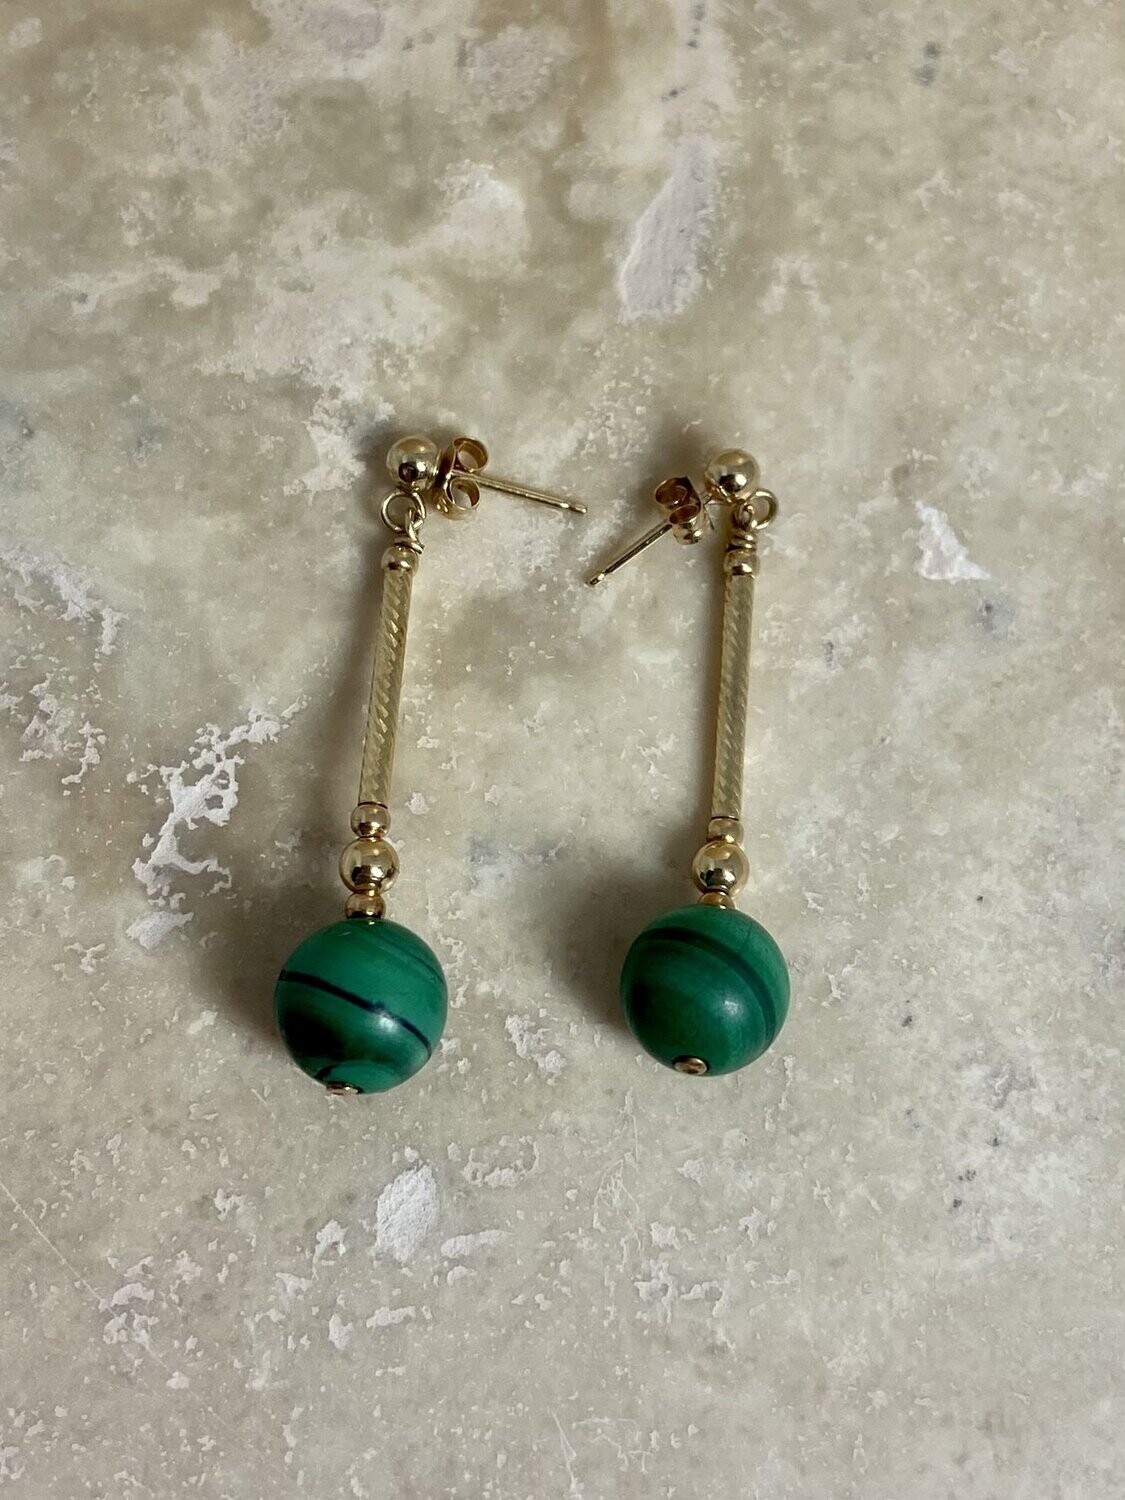 Earrings with green macalite